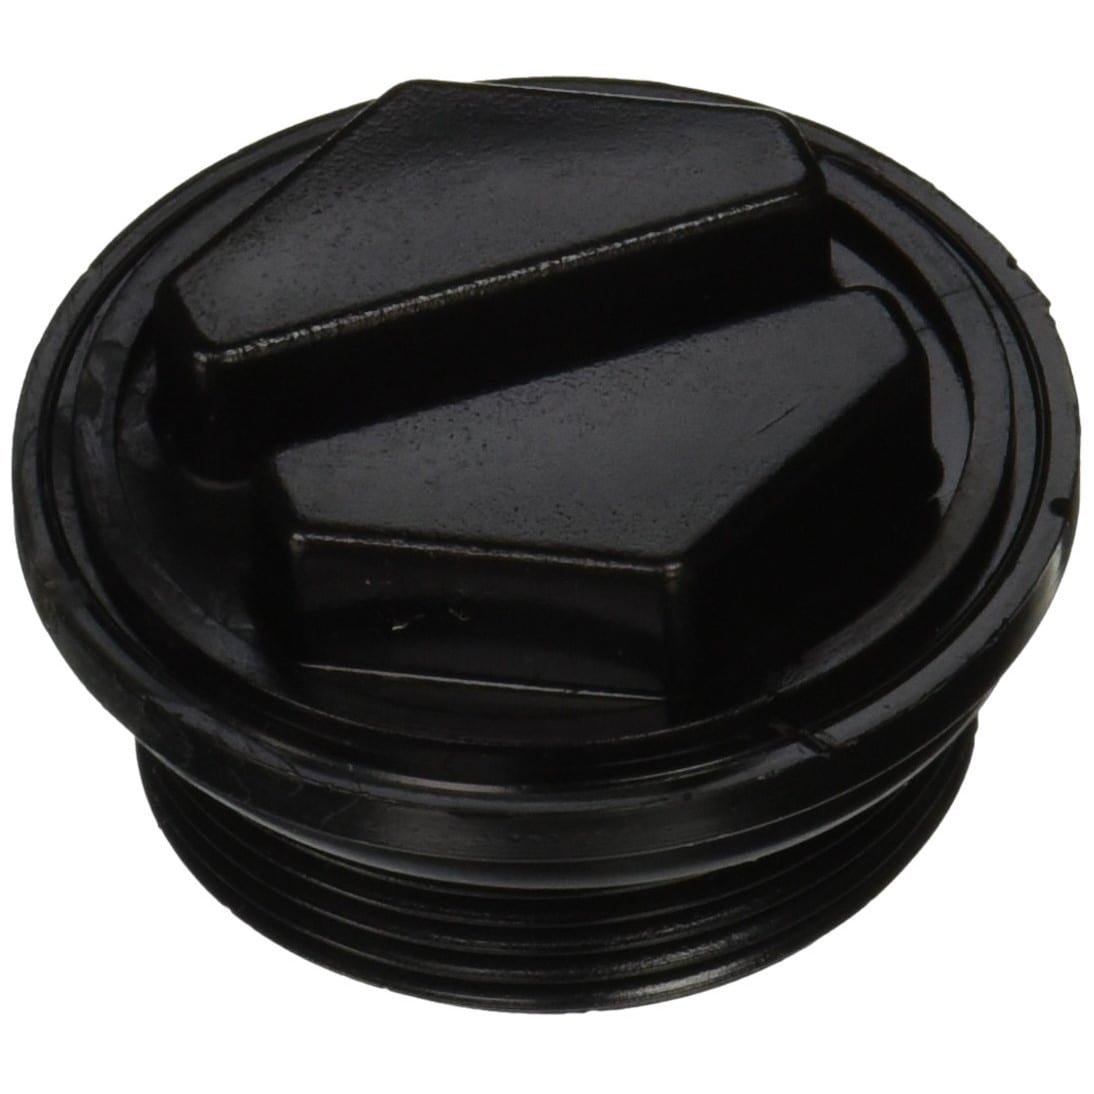 Pentair 86202000 1-1/2-Inch Plug Drain Cap with O-Ring Replacement Pool and Spa Filter